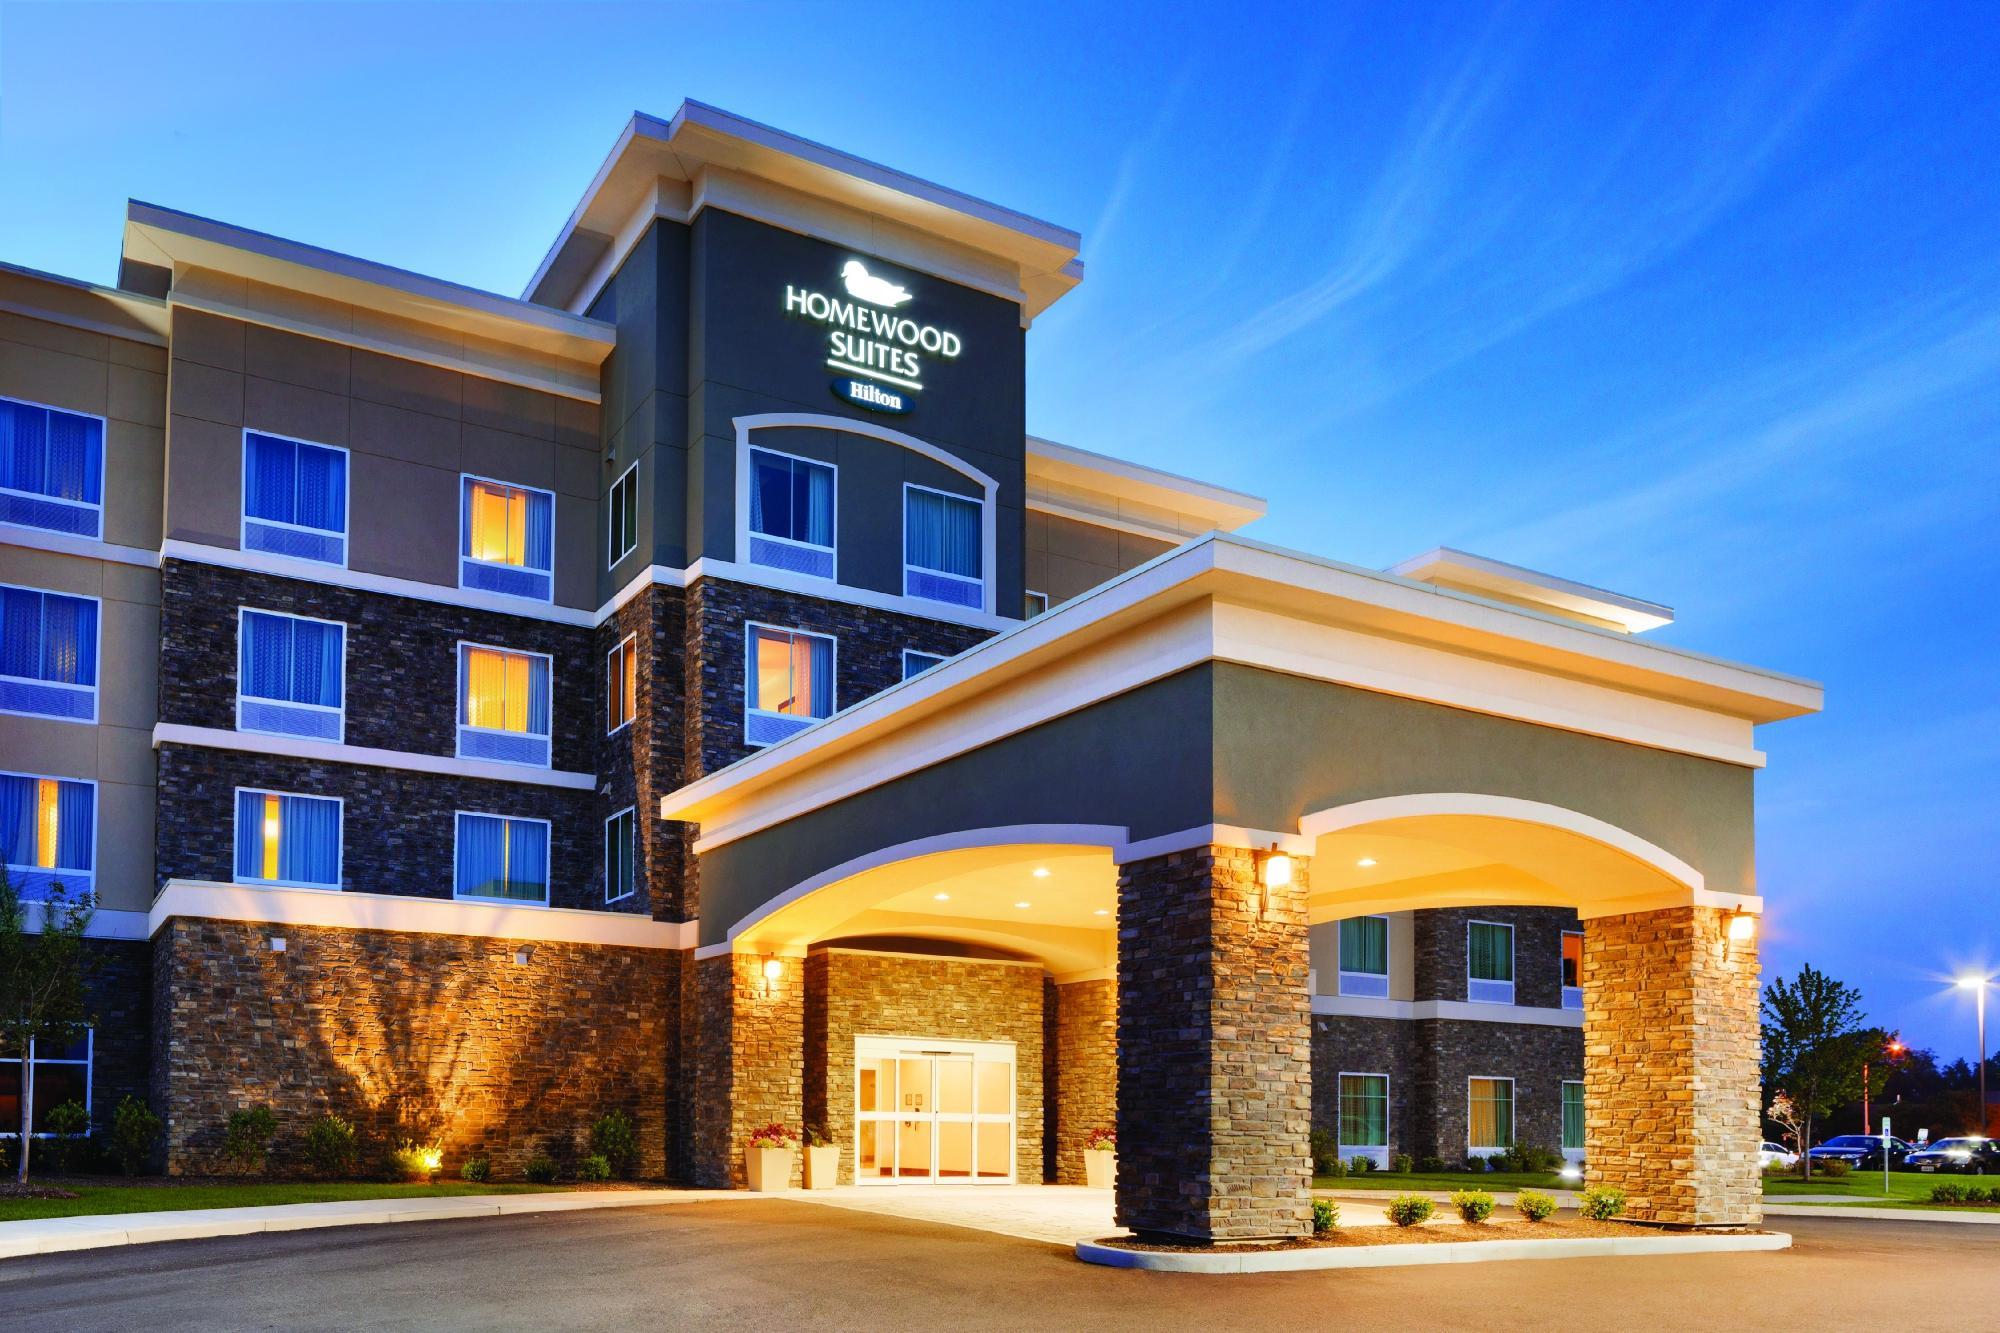 Photo of Homewood Suites by Hilton Akron Fairlawn, Akron, OH